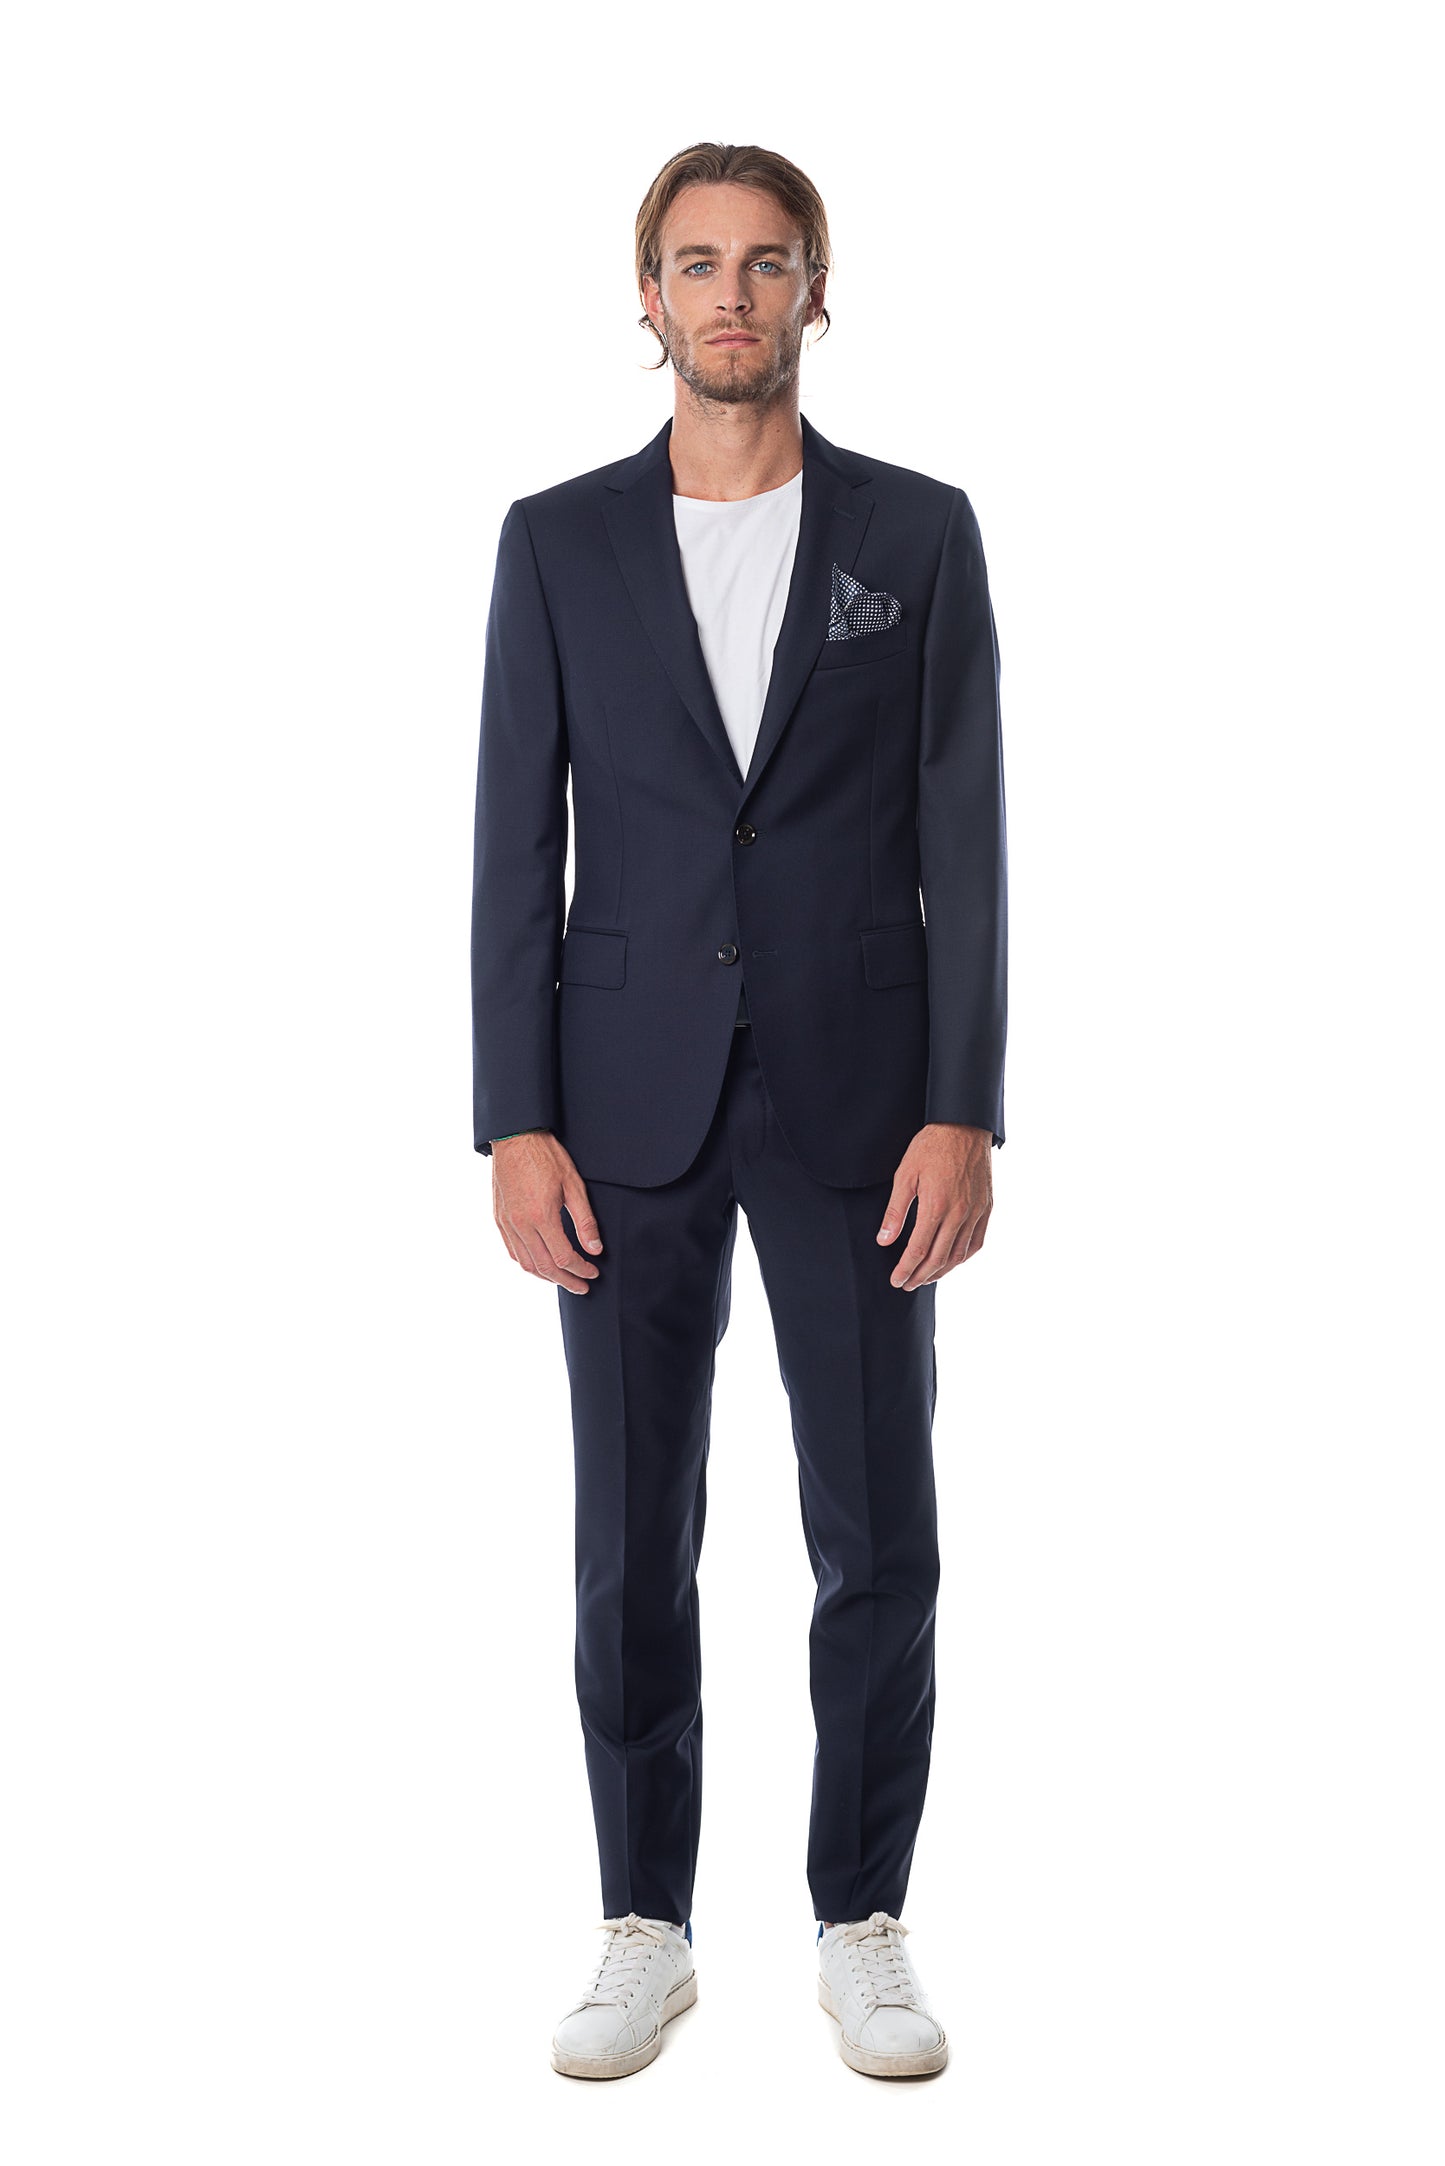 Blue Suit Made in Wool 